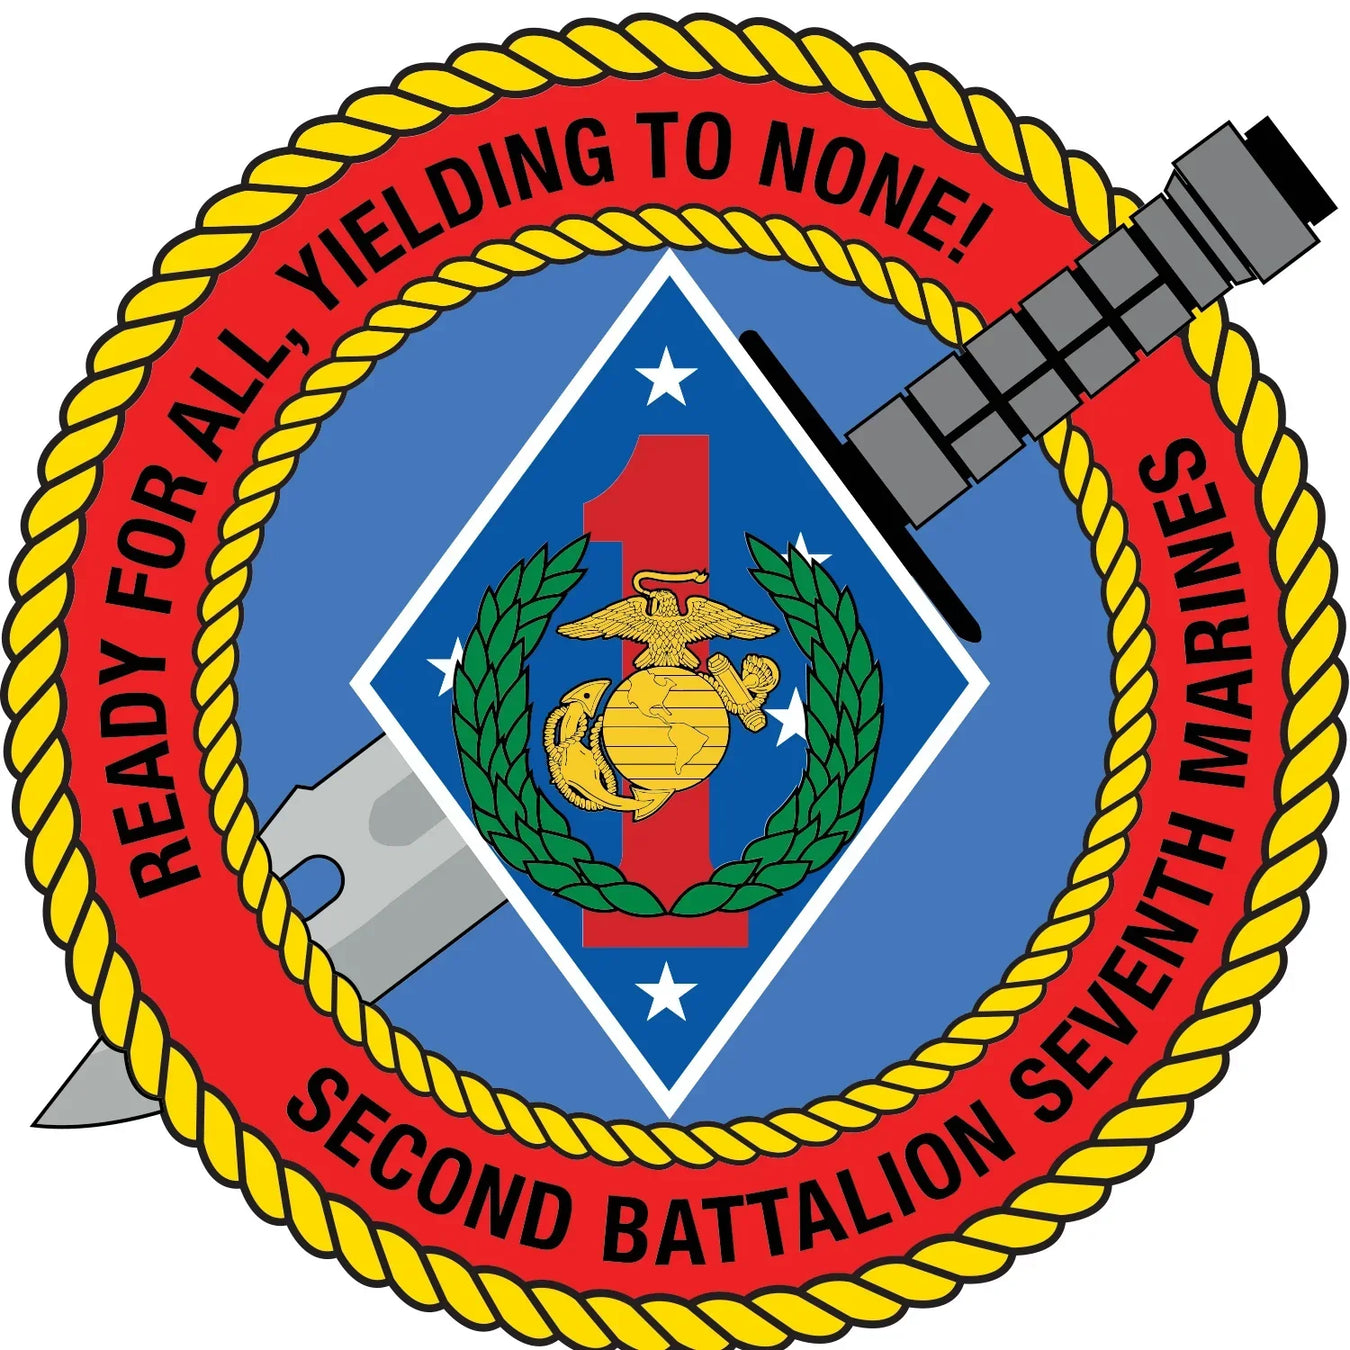 2nd Battalion, 7th Marines (2/7 Marines) Merchandise - Shop t-shirts, hoodies, patches, decals, hats, flags and more